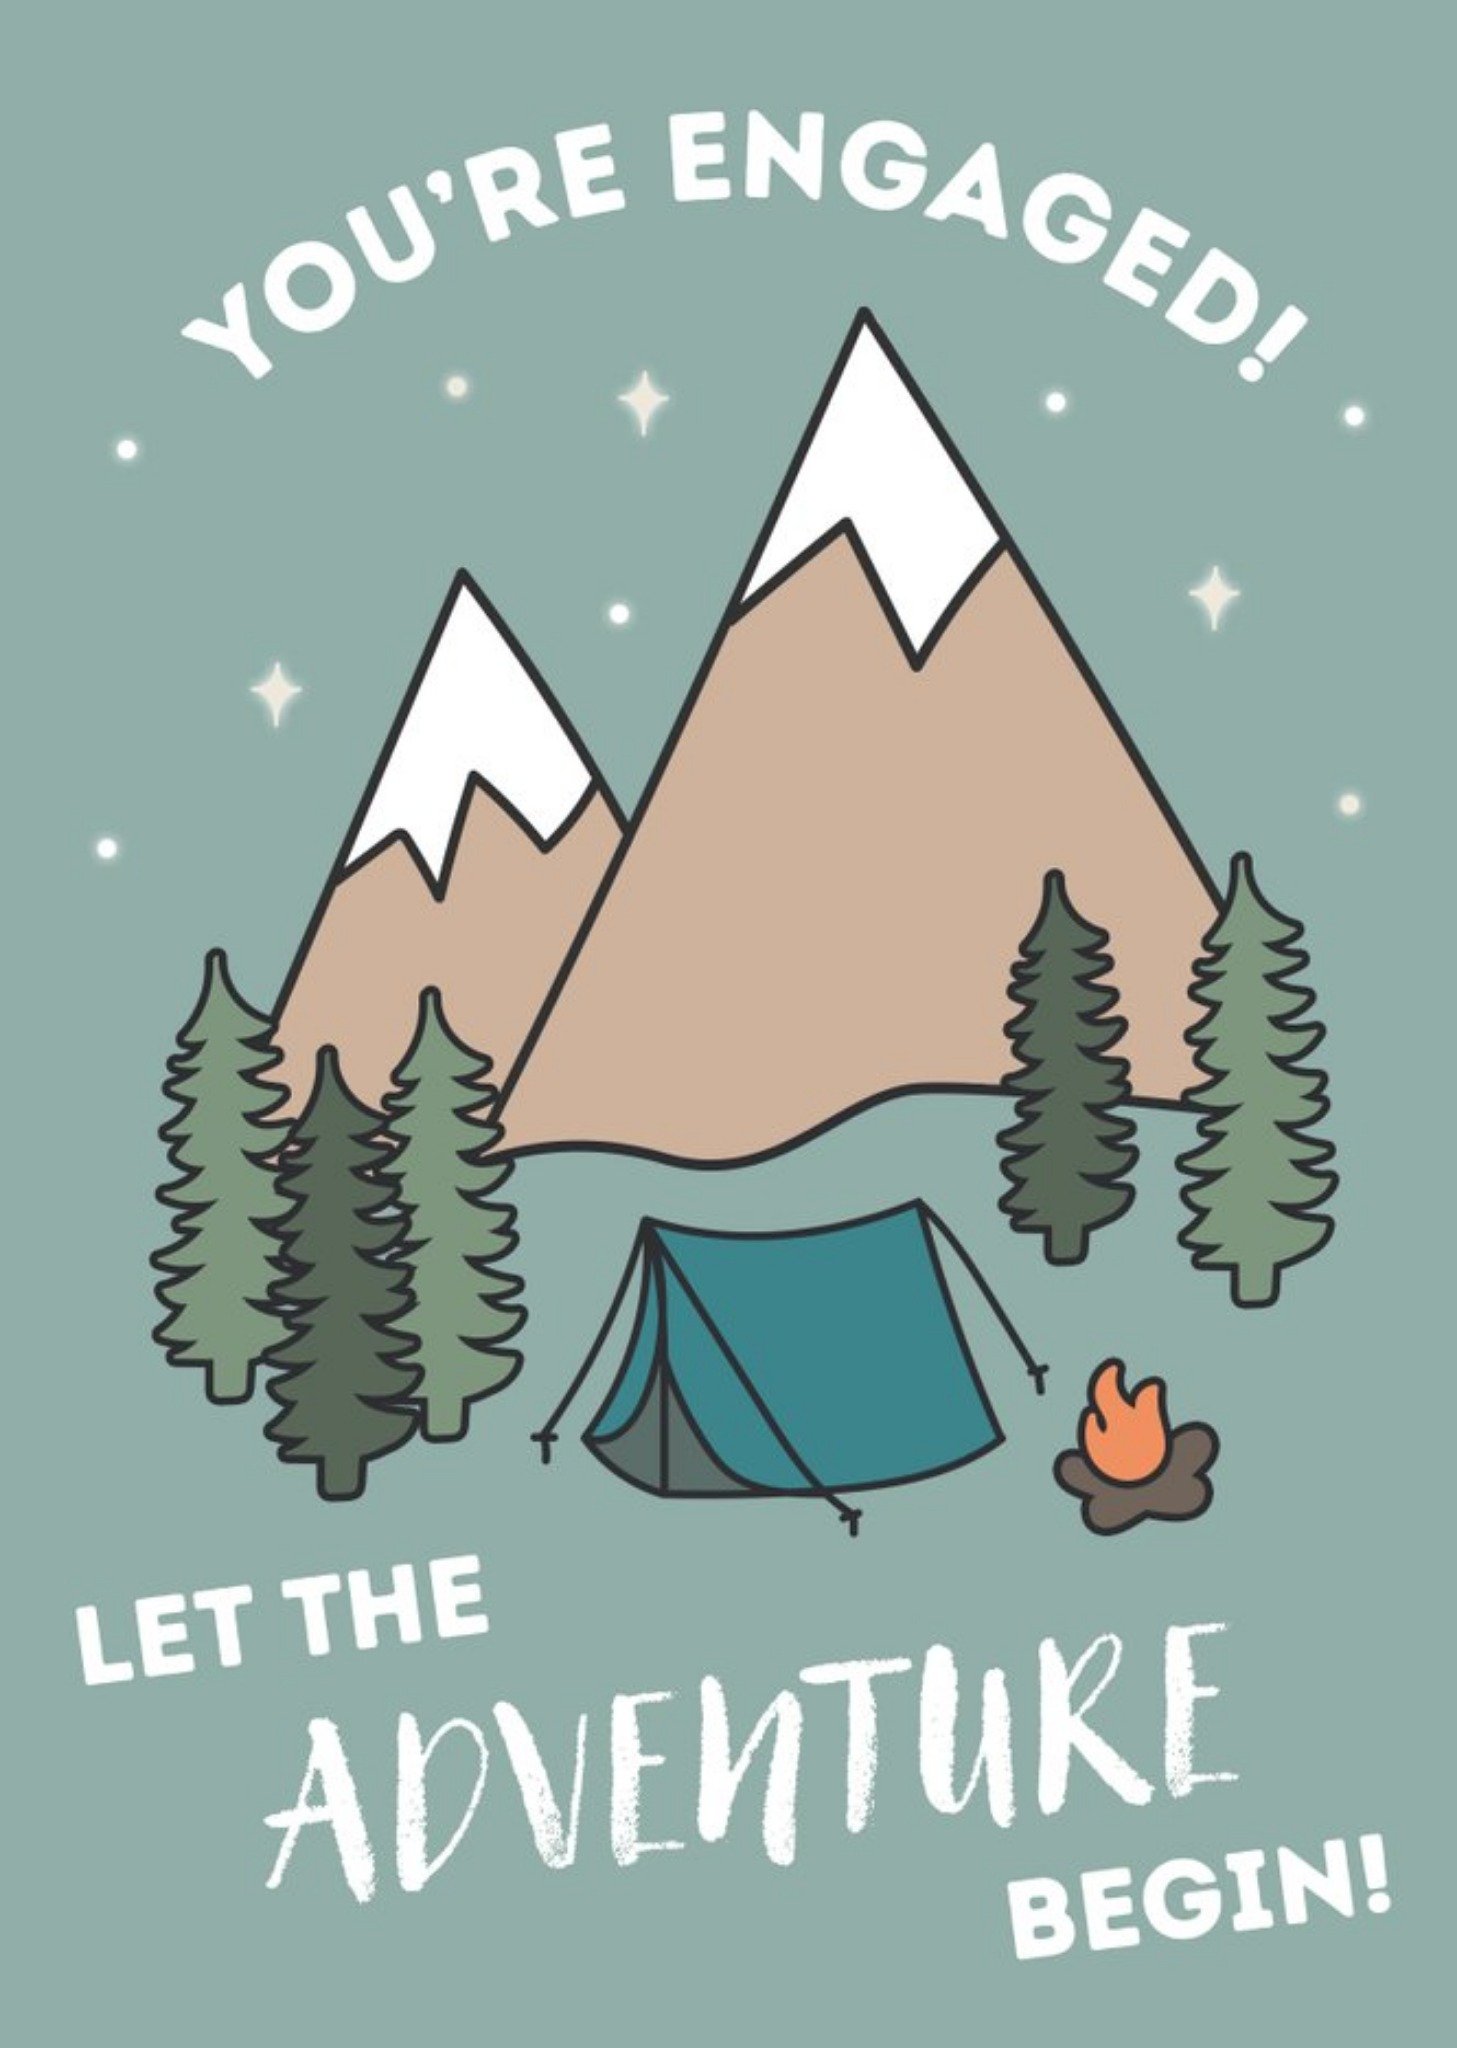 Moonpig Outdoor Adventure Camping Scene Let The Adventure Begin You're Engaged Card Ecard